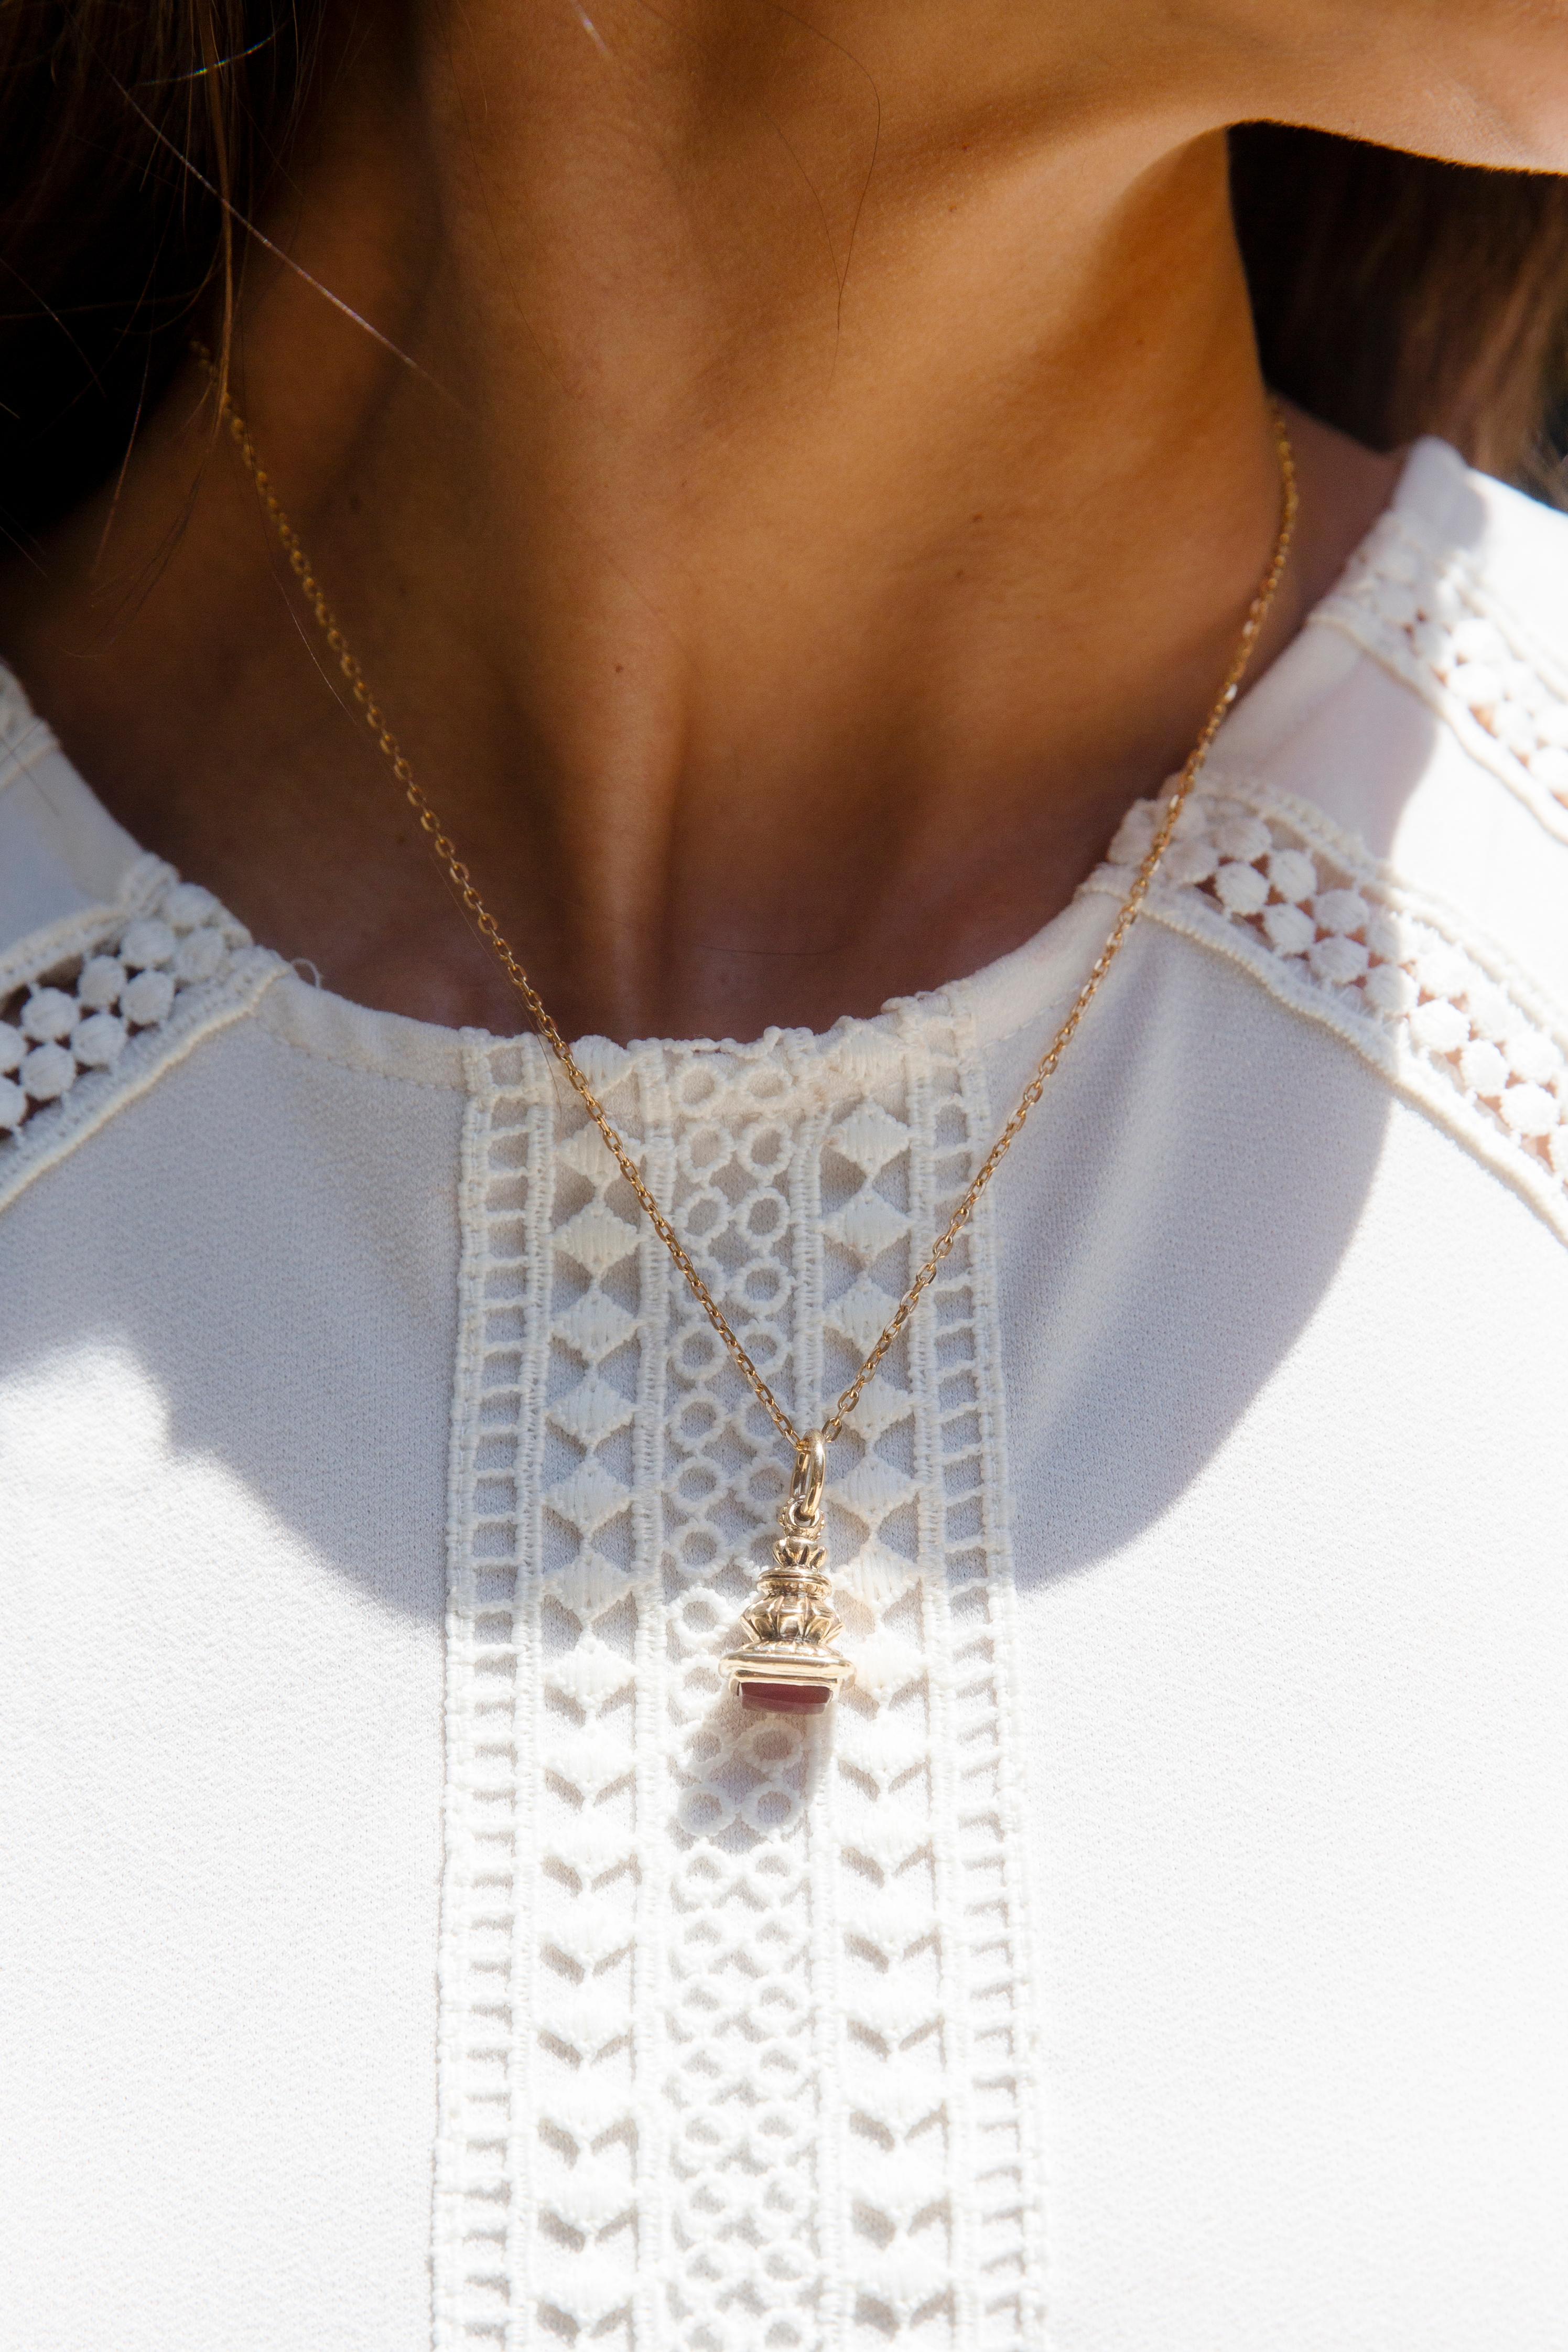 Crafted in the 19th century in 9 carat gold, The Jacinda Pendant is reminder of days gone by. Tiers of engraved gold, finished with rich carnelian creates a story that will be yours for years to come.

The Jacinda Pendant Gem Details
The rectangular